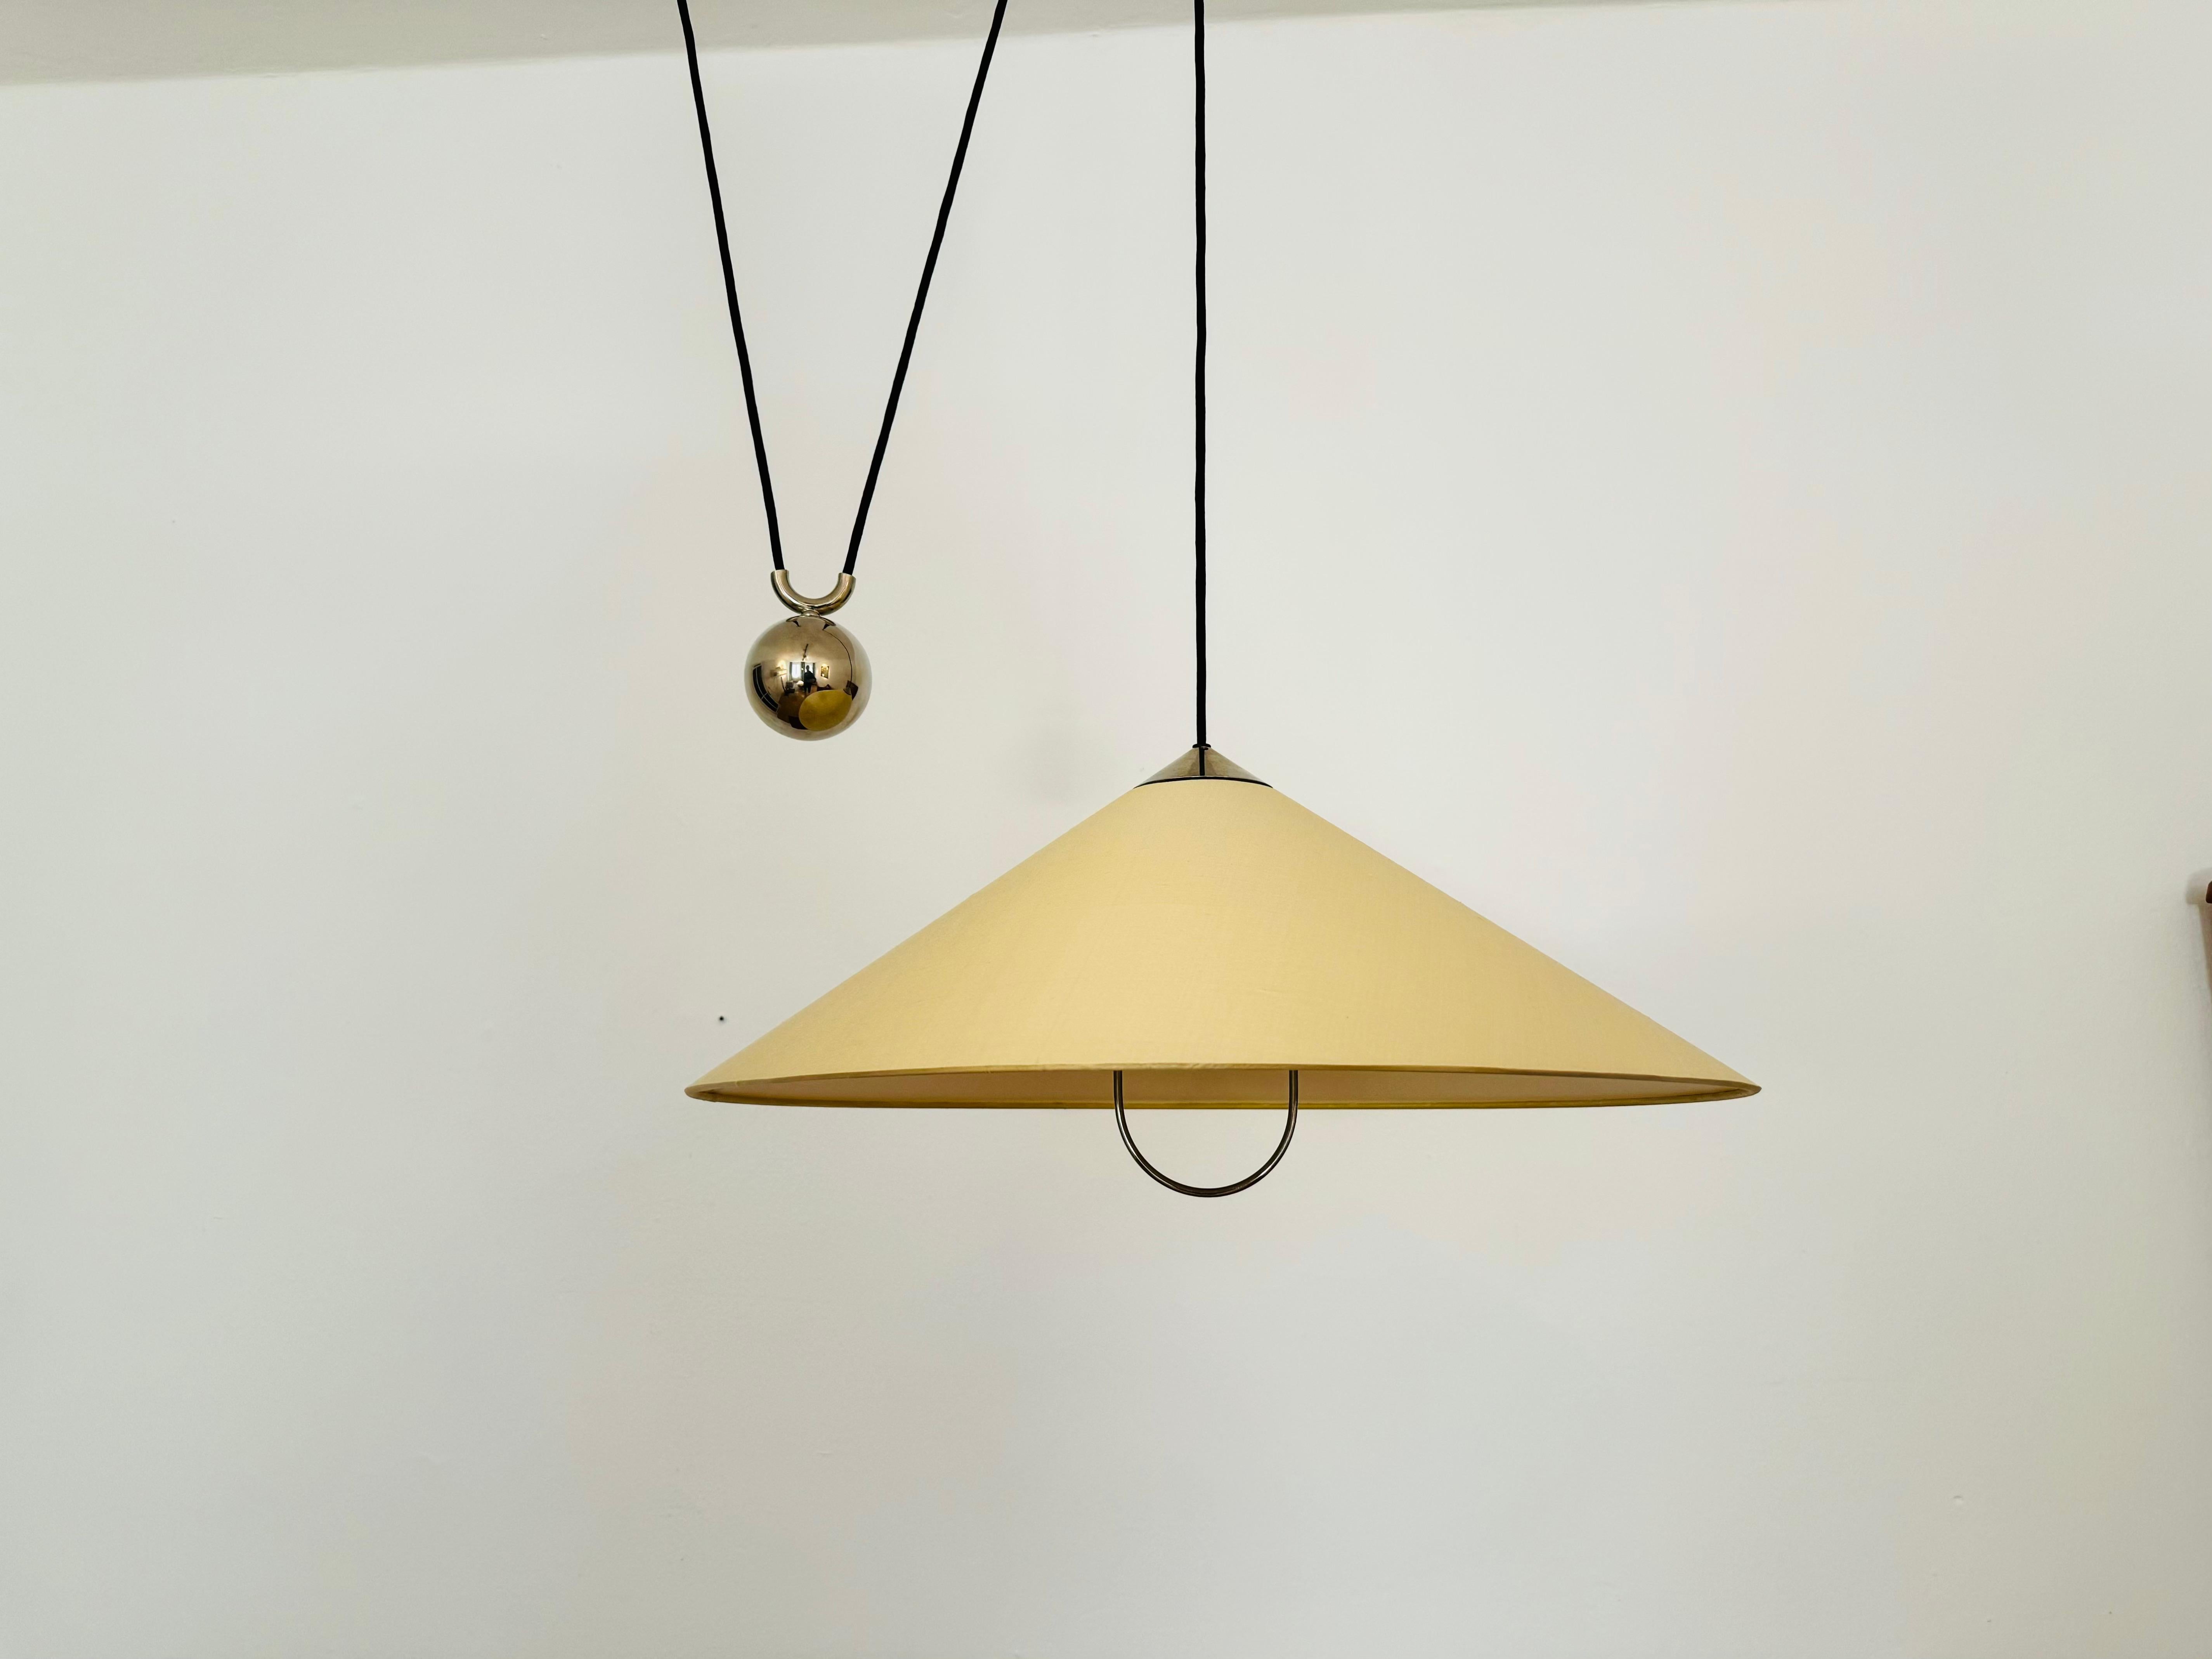 Very nice nickel -plated pendant lamp from the 1960s.
The lighting effect of the lamp is extremely beautiful.
The design and the special lampshade create a very noble and pleasant light.
The lamp ensures a very cozy atmosphere and is very high